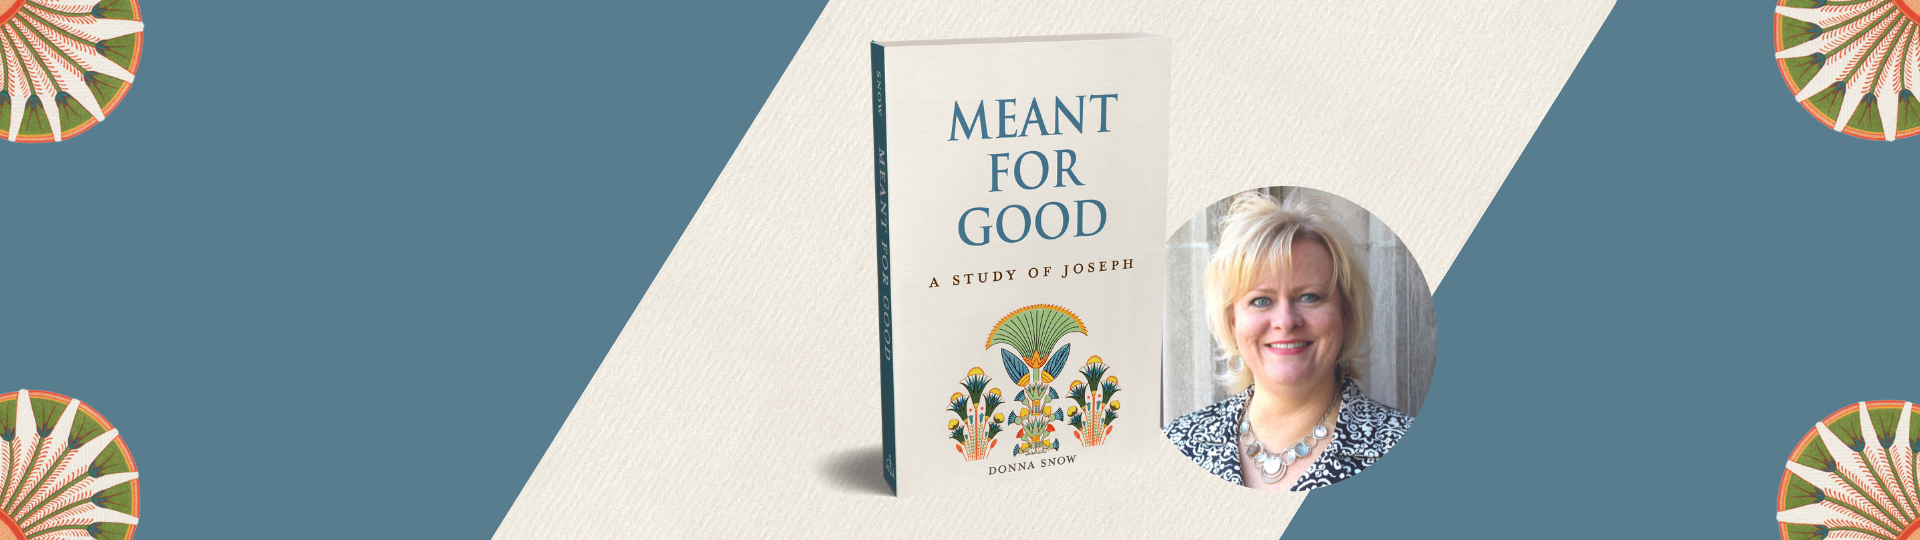 Press Release: Discover Hope and Faithfulness through the Grand Story of Joseph